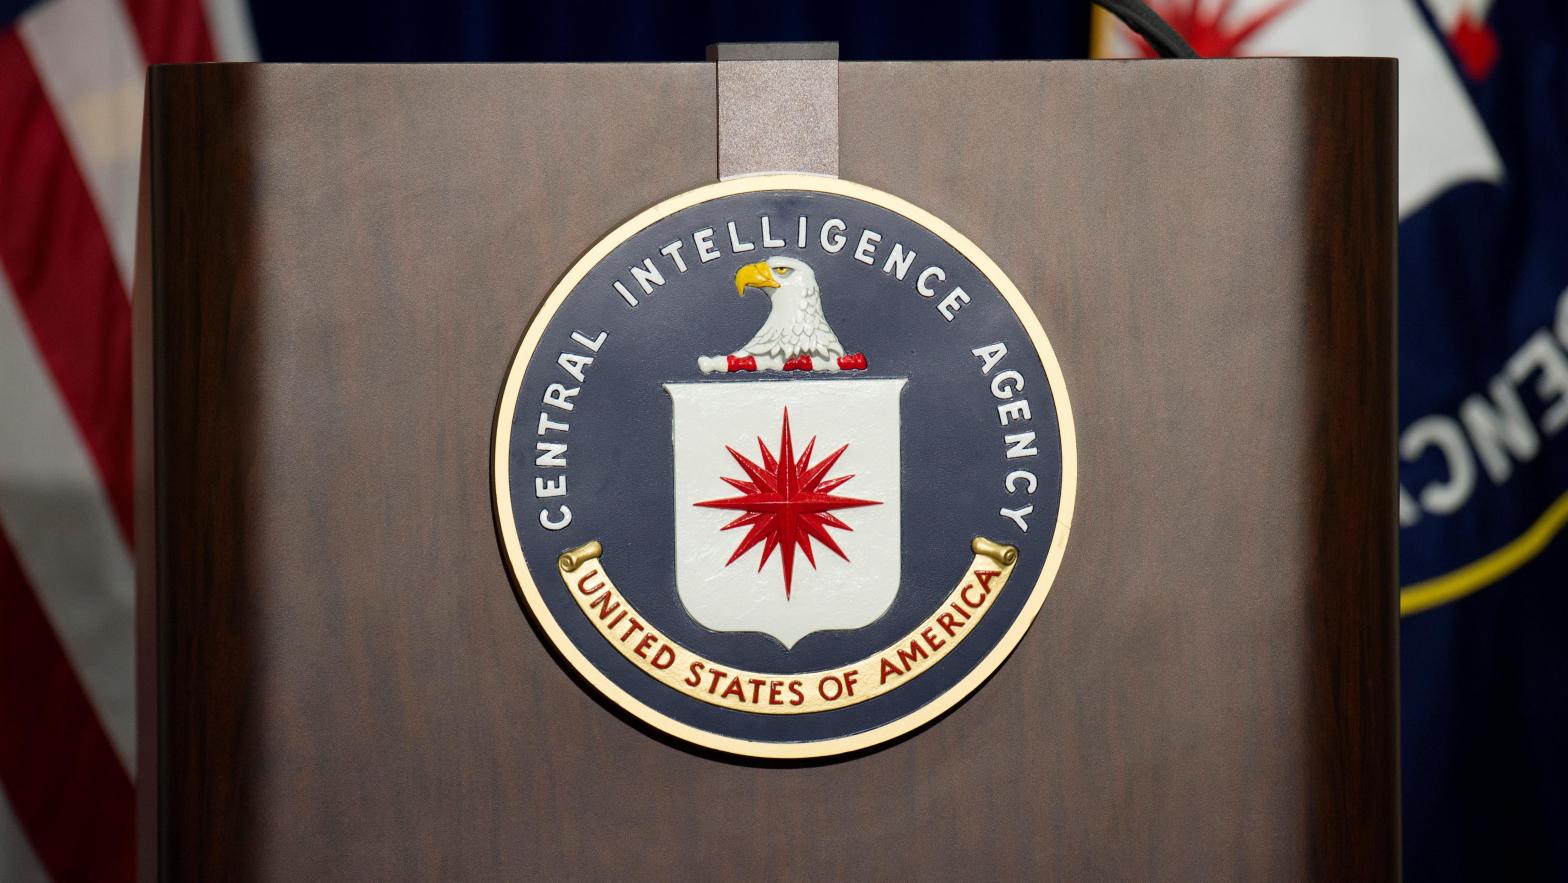 The CIA had multiple directors that oversaw the U.S.' reportedly disastrous use of fake websites for overseas operations from at least 2004 to 2013, but none could see just how easily identifiable any of these websites really were. (Photo: JIM WATSON/AFP, Getty Images)